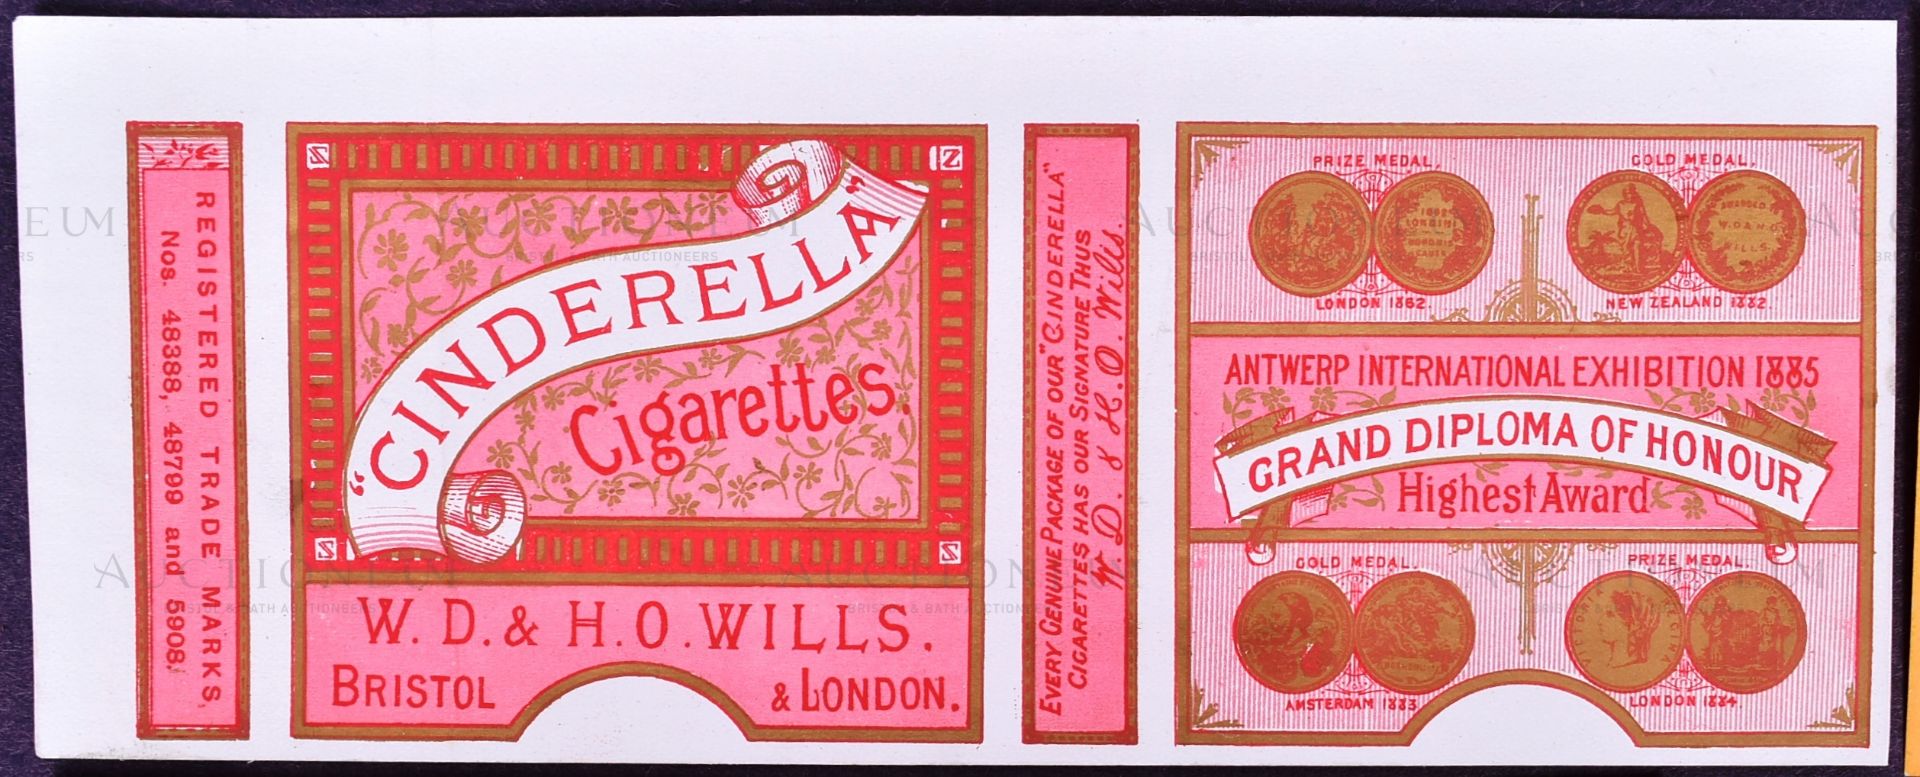 MARDON, SON & HALL - EARLY 20TH CENTURY CIGARETTE PACKET DESIGNS - Image 6 of 7